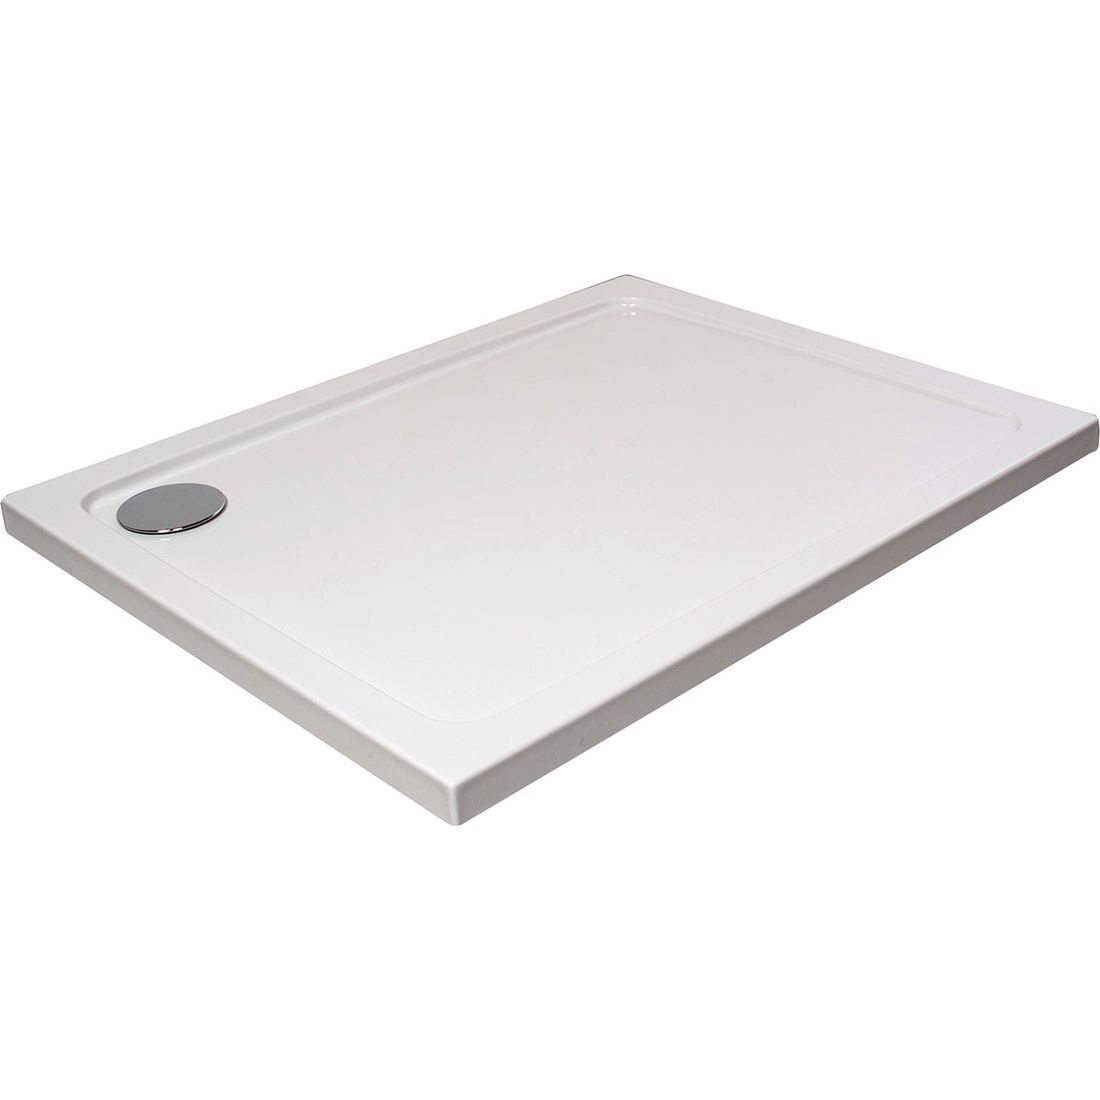 Shower Tray 1200 X 760Mm Low Profile Abs White